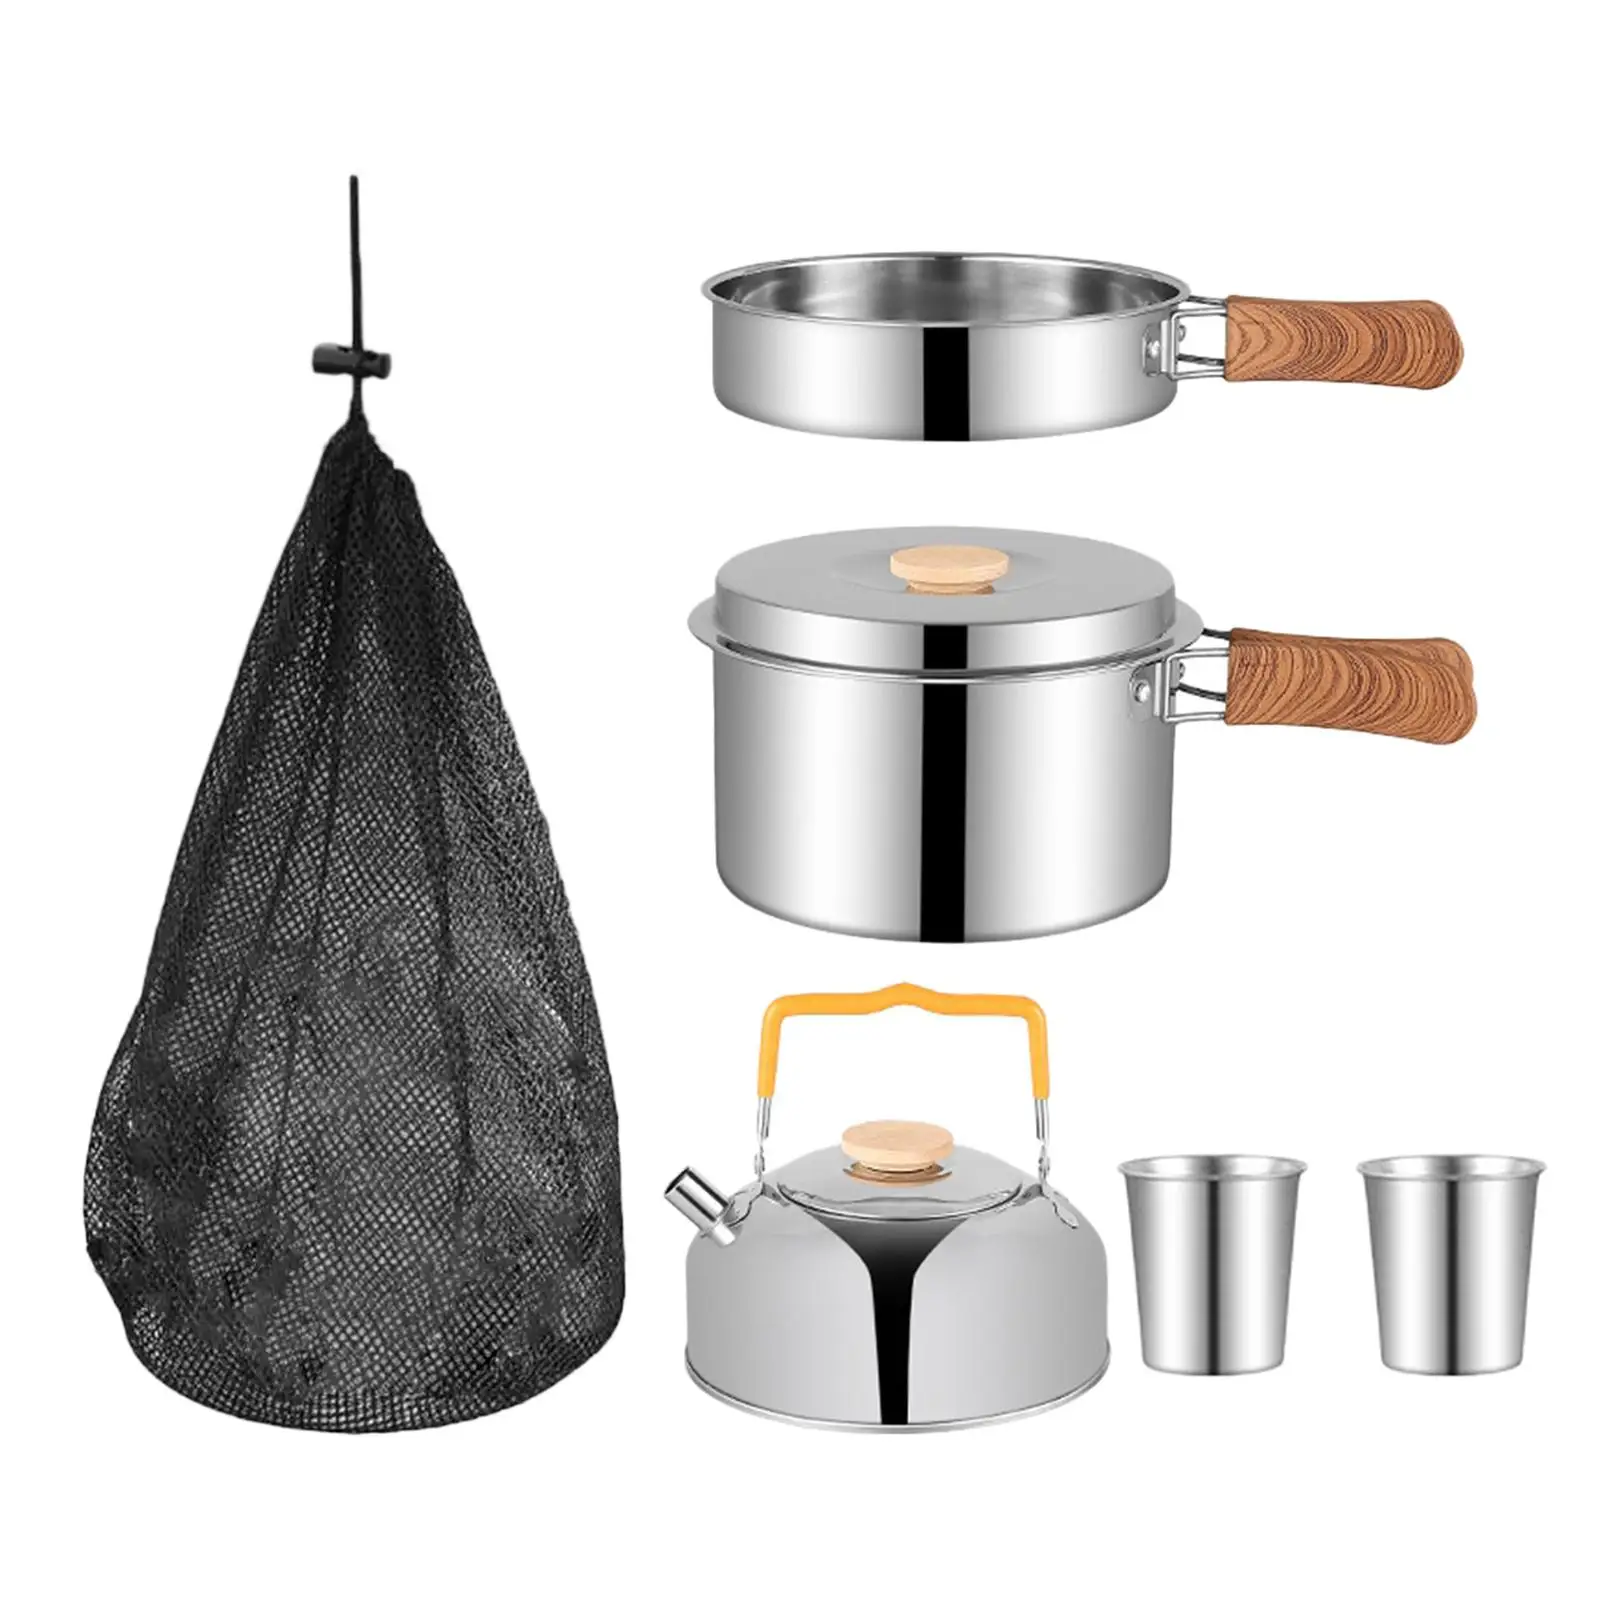 5x Camping Pot Pan and Kettle with Carry Bag Stockpot Camping Cookware Set for Home Mountaineering Fishing Equipment Supplies